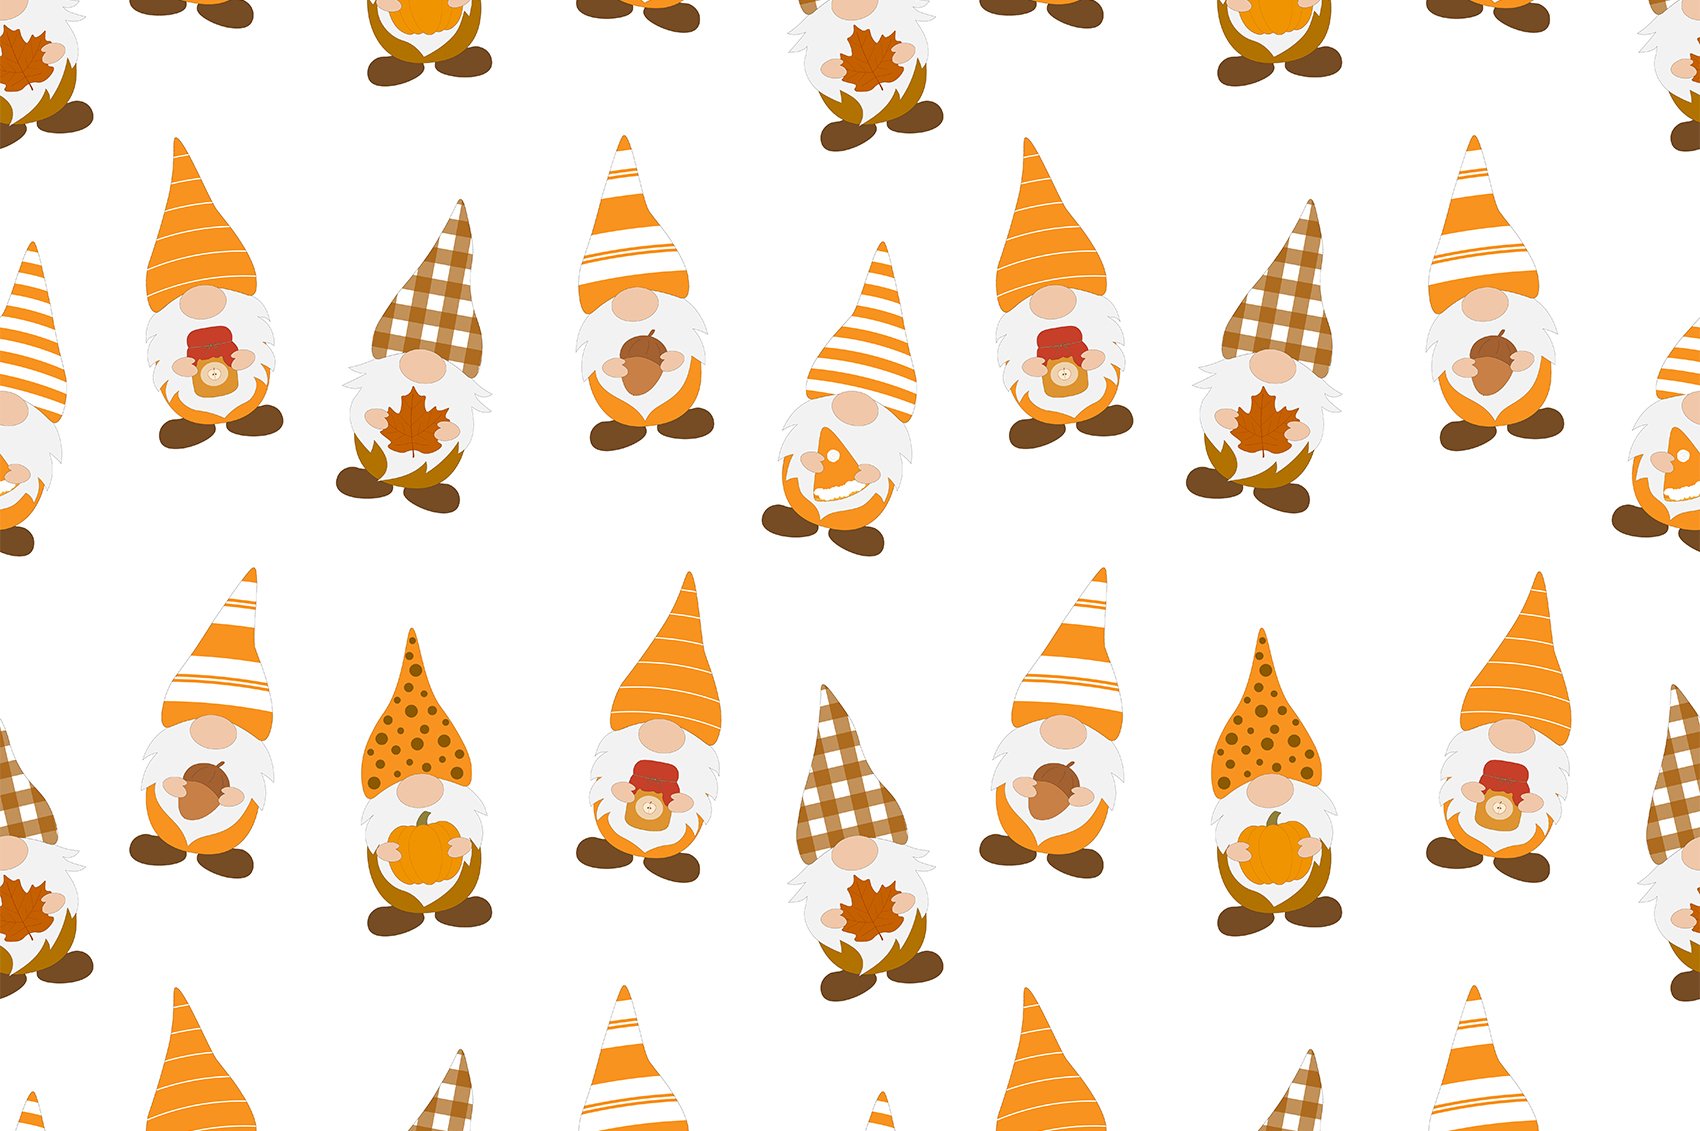 Small gnomes with different hats in waiting for you.